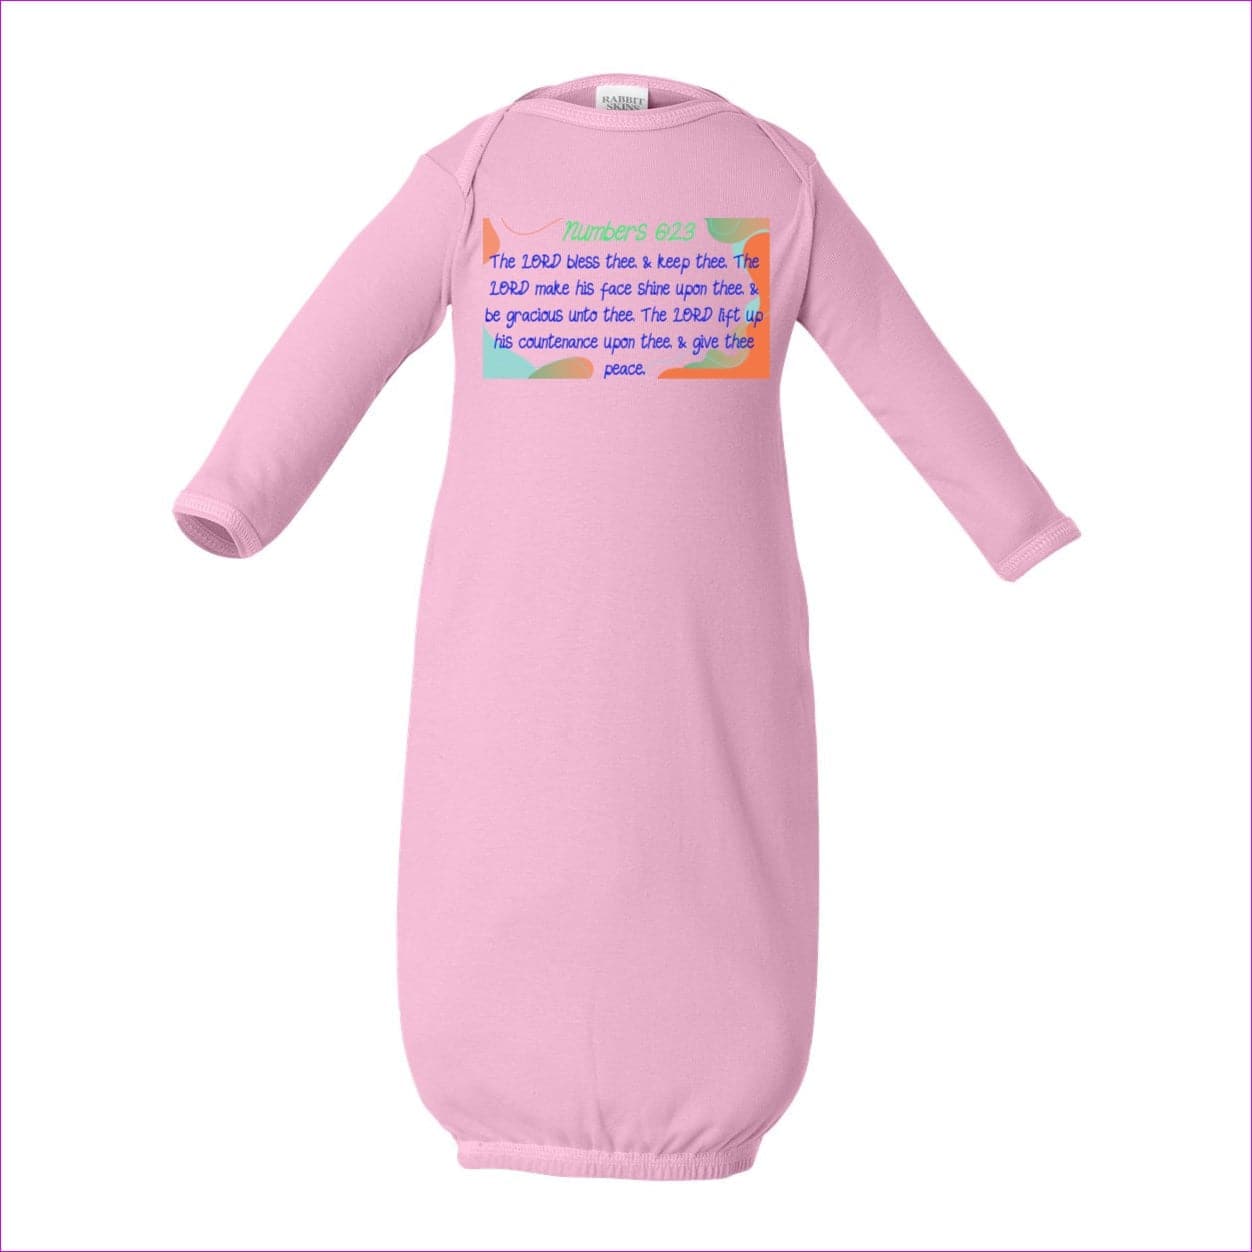 NB Pink Numbers 6:23 Newborn Layette - layette at TFC&H Co.